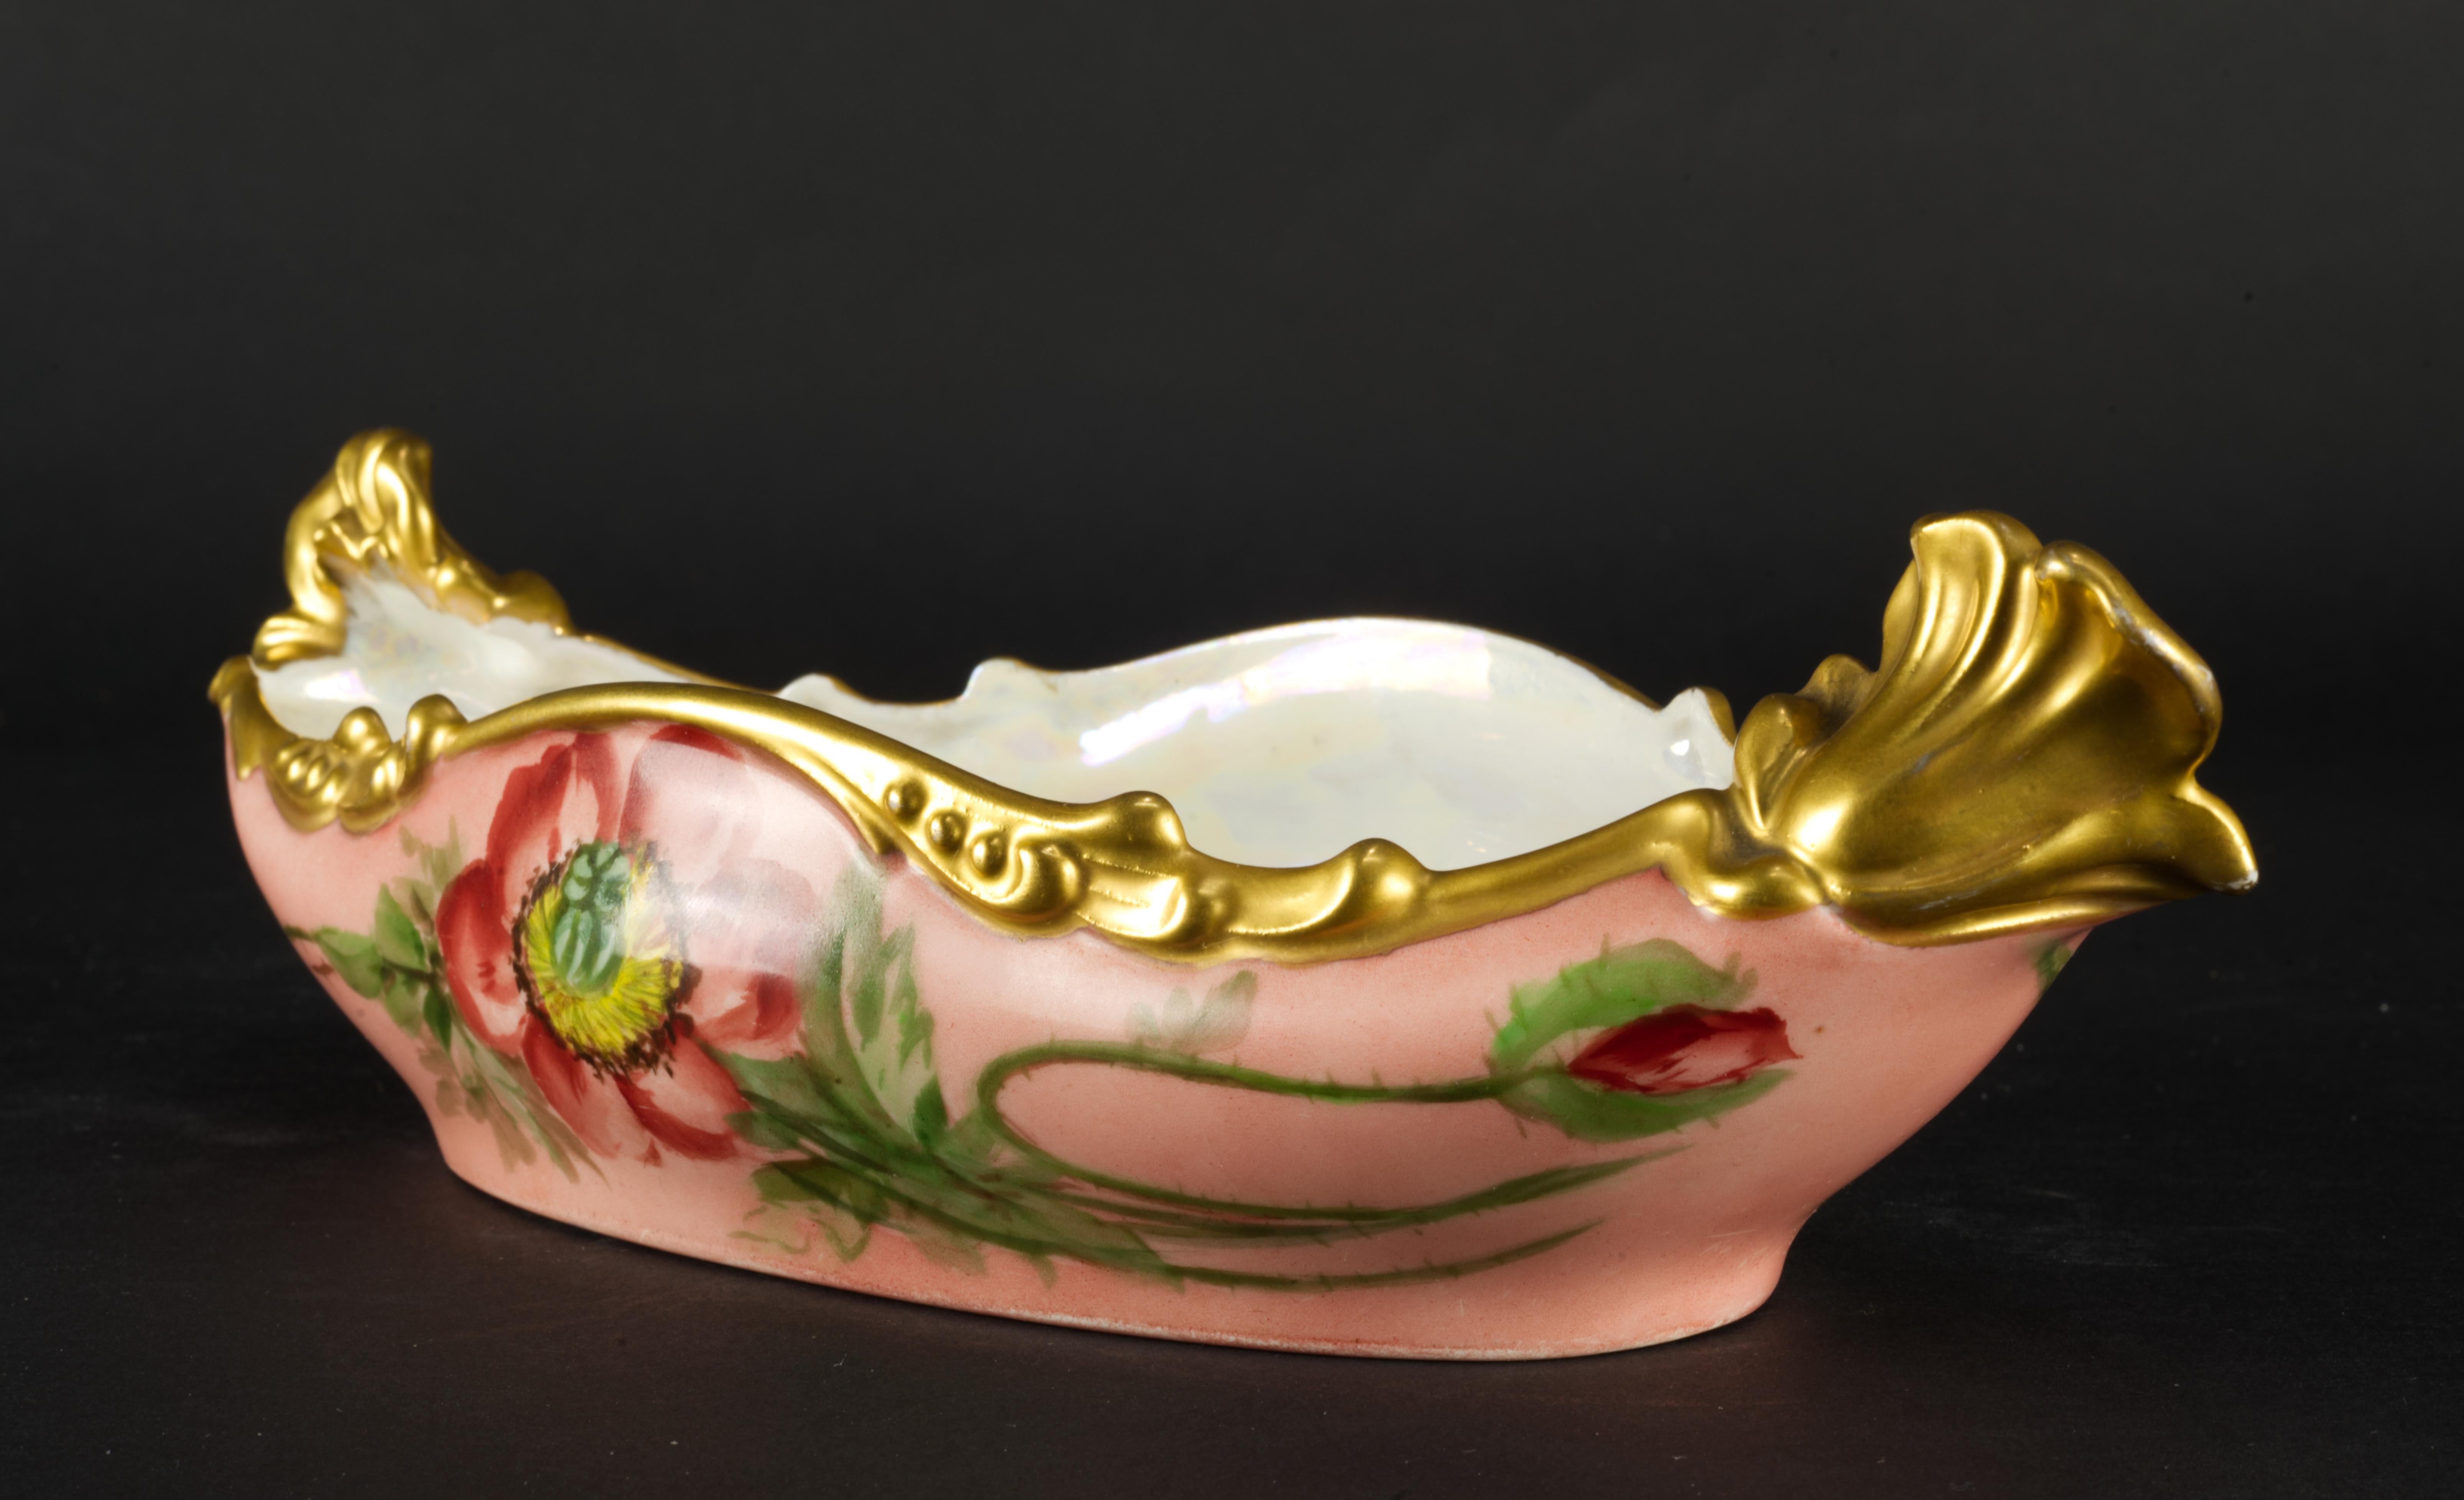 Rare Jean Pouyat Limoges France Oval Hand-painted Porcelain Ravier Bowl, 1926 For Sale 6